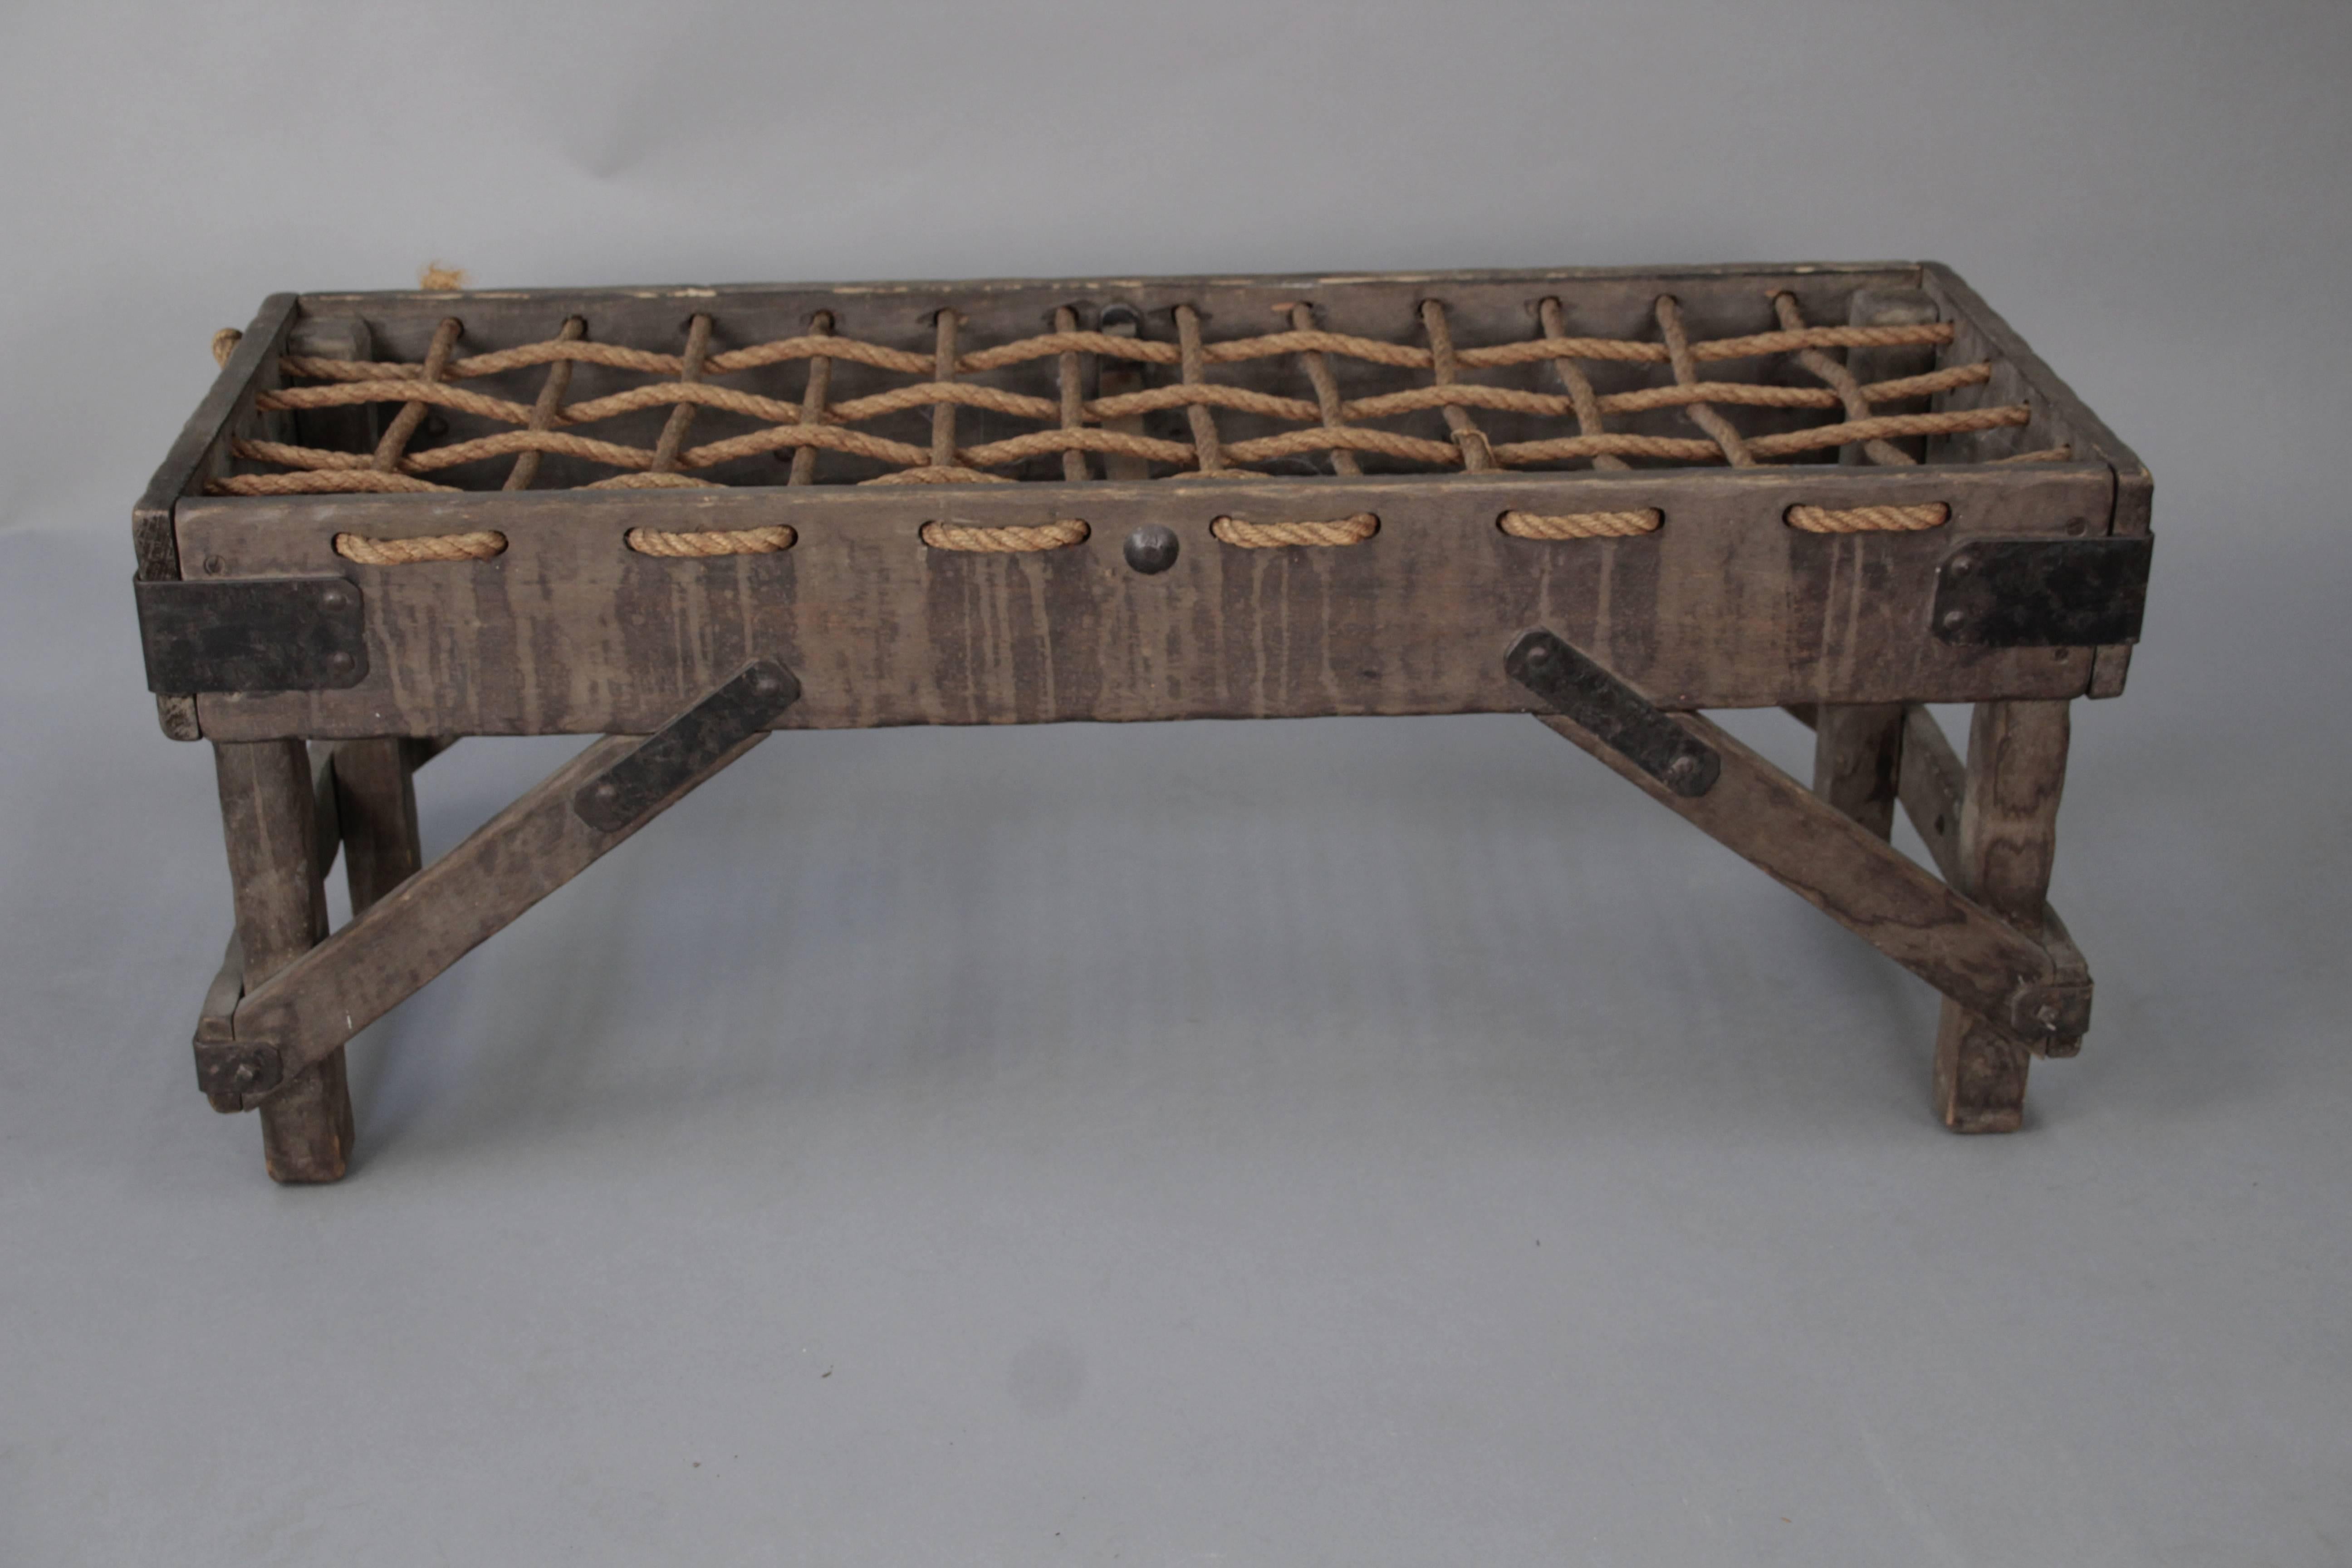 Early 1930s Monterey bench with rope. Original old wood finish with pumice. Signed.